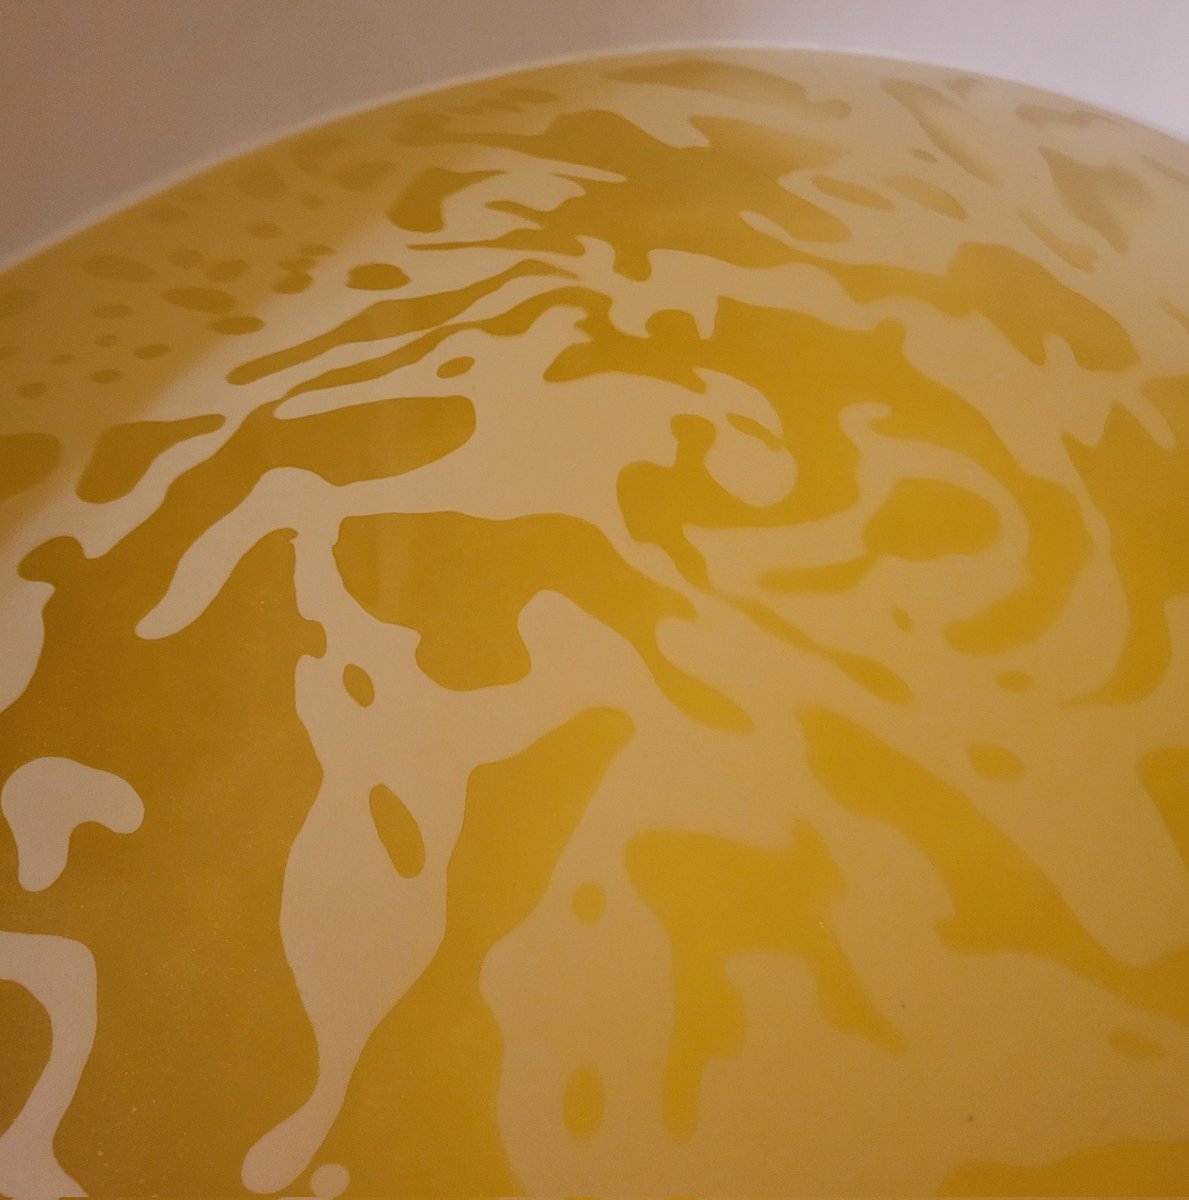 The dragon egg bath b0mba from lush looks straight up like piss so if its your dream to sit in a vat of piss or if you need that aesthetic for a clip now you know